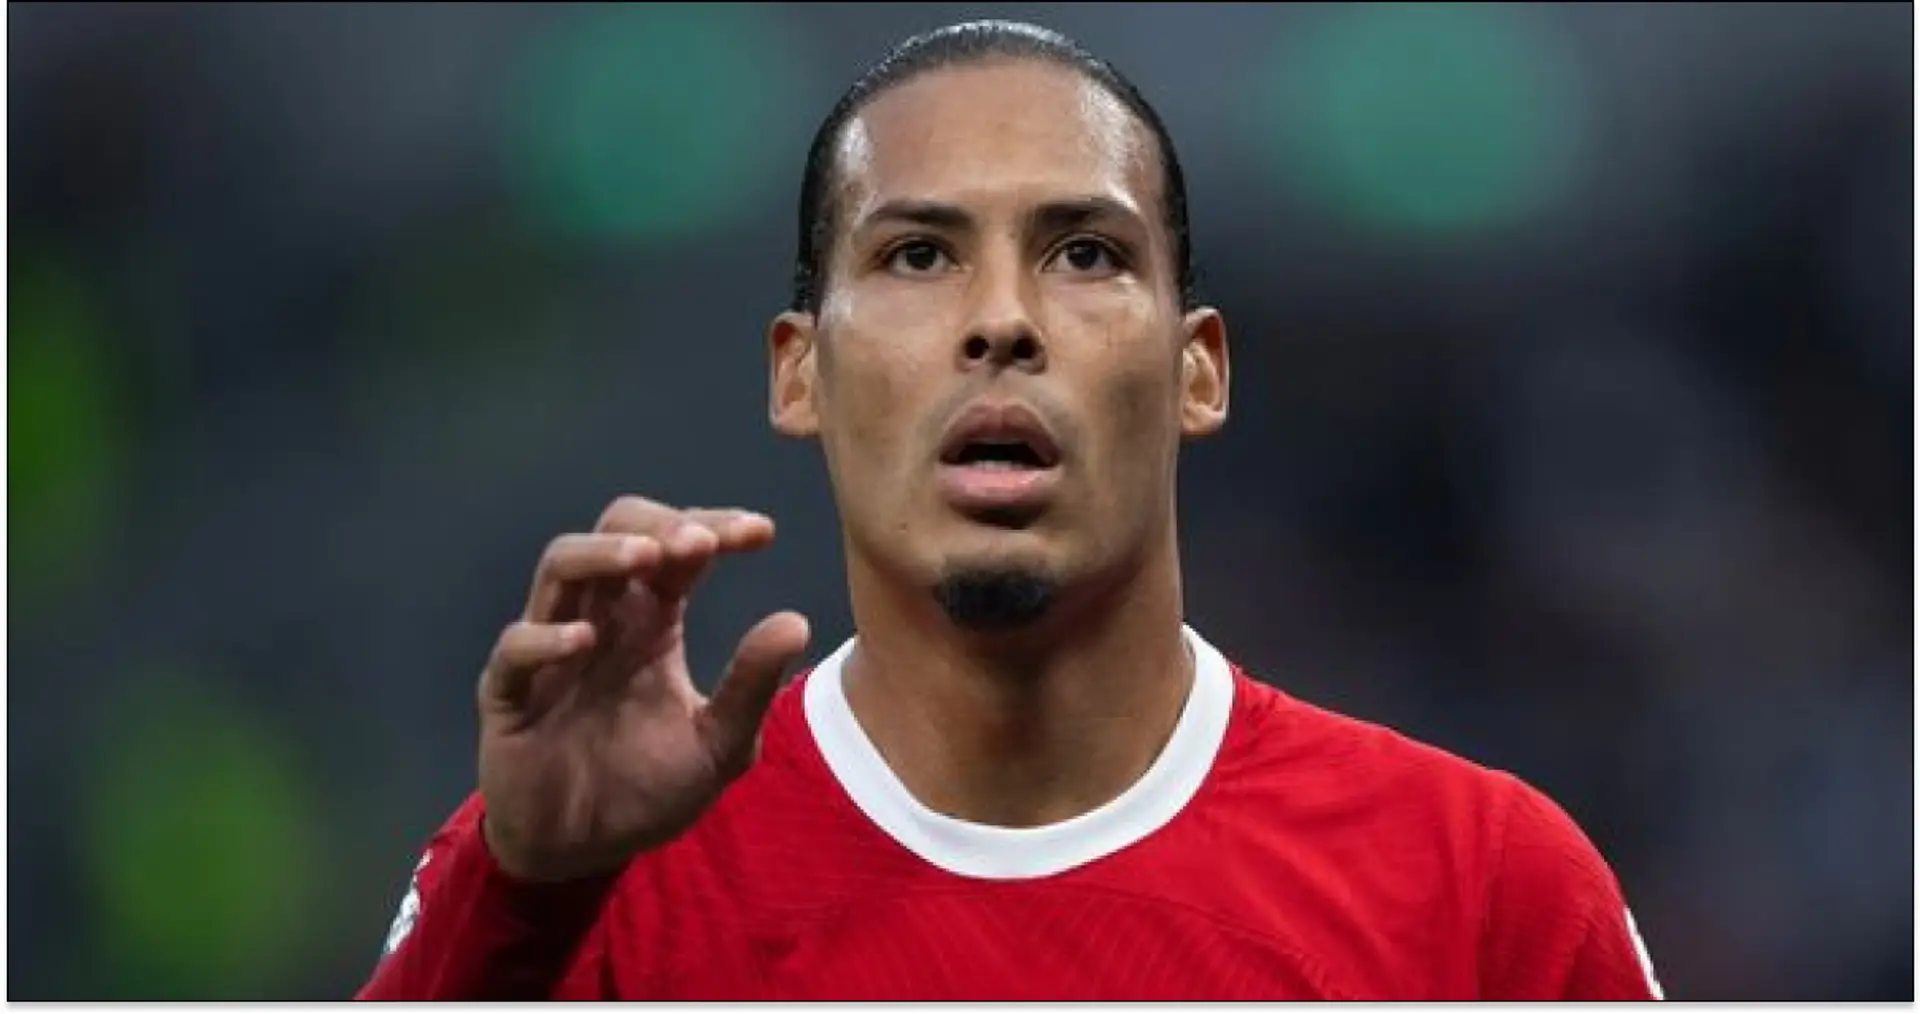 'I know for a fact': Klopp reacts as Van Dijk casts doubt on his Liverpool future beyond 2024